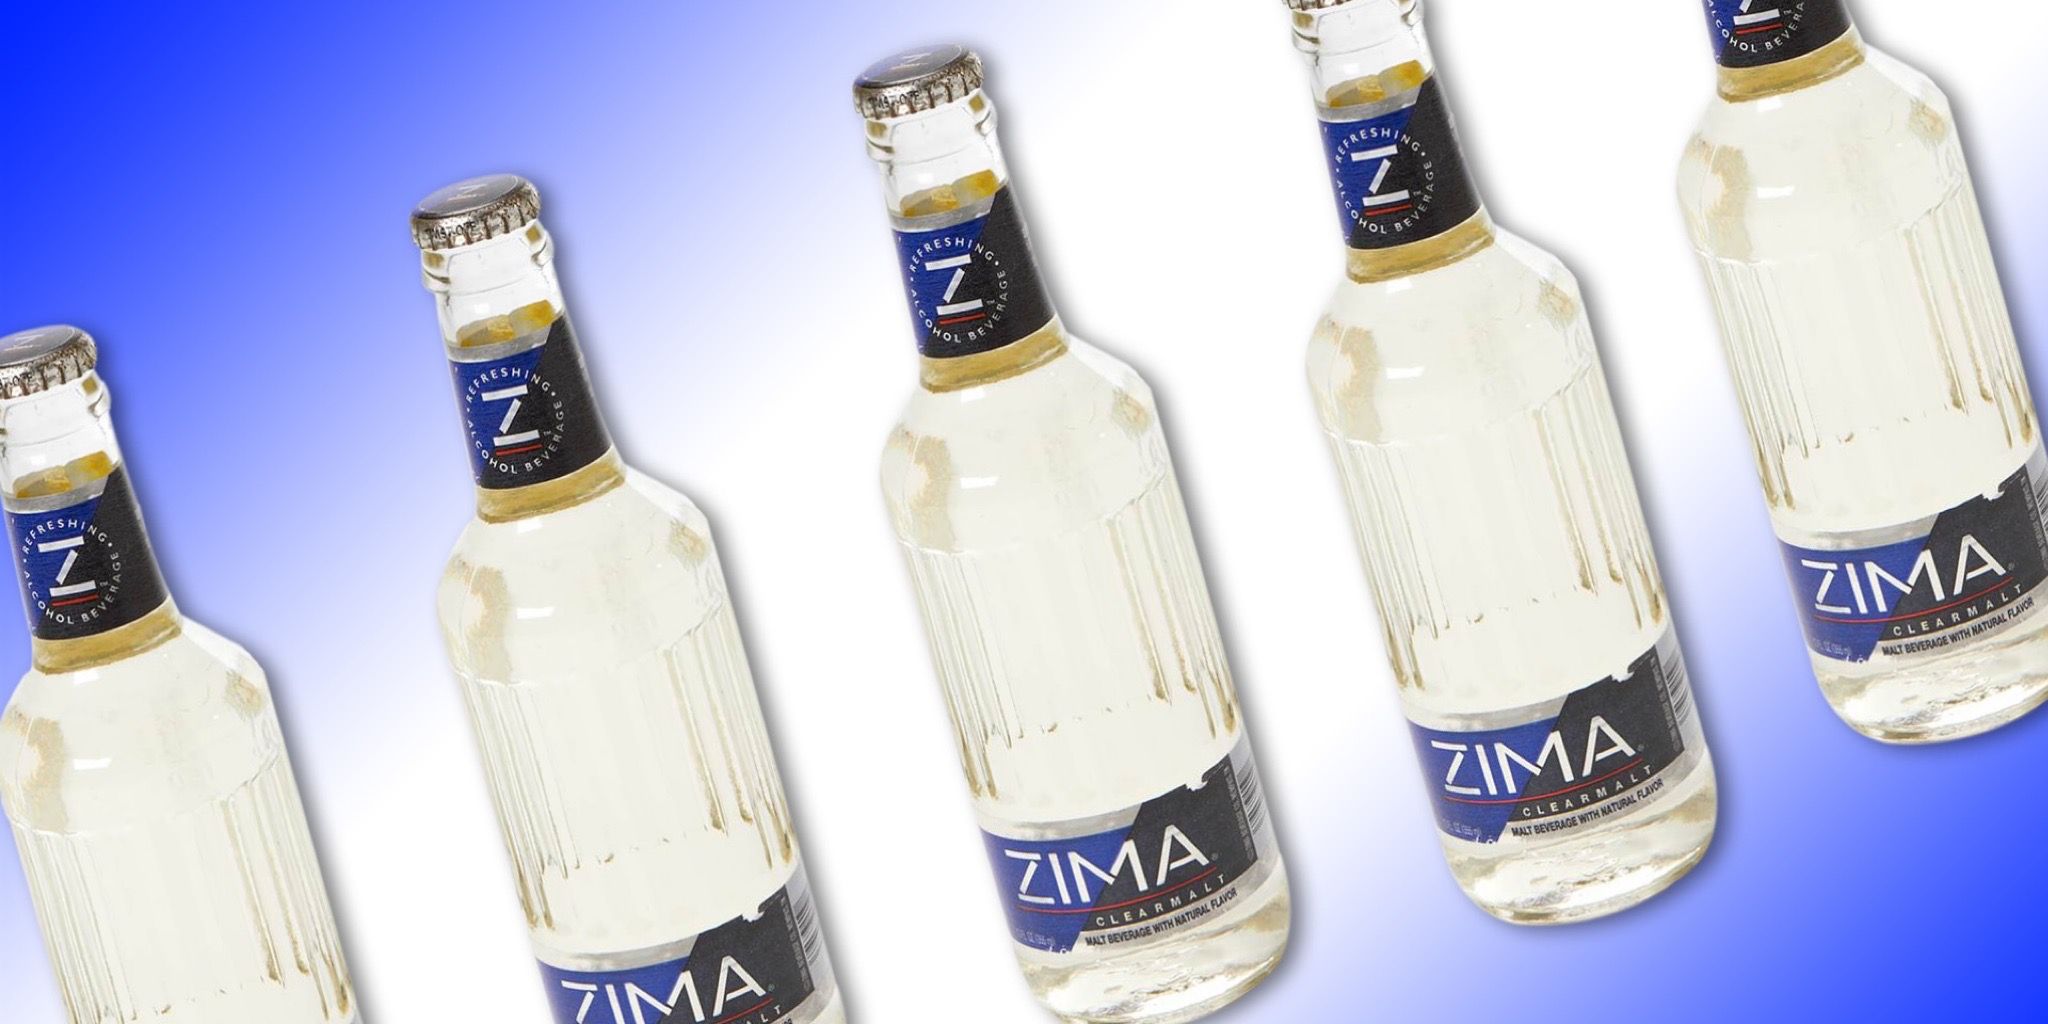 Picture of bottles of Zima